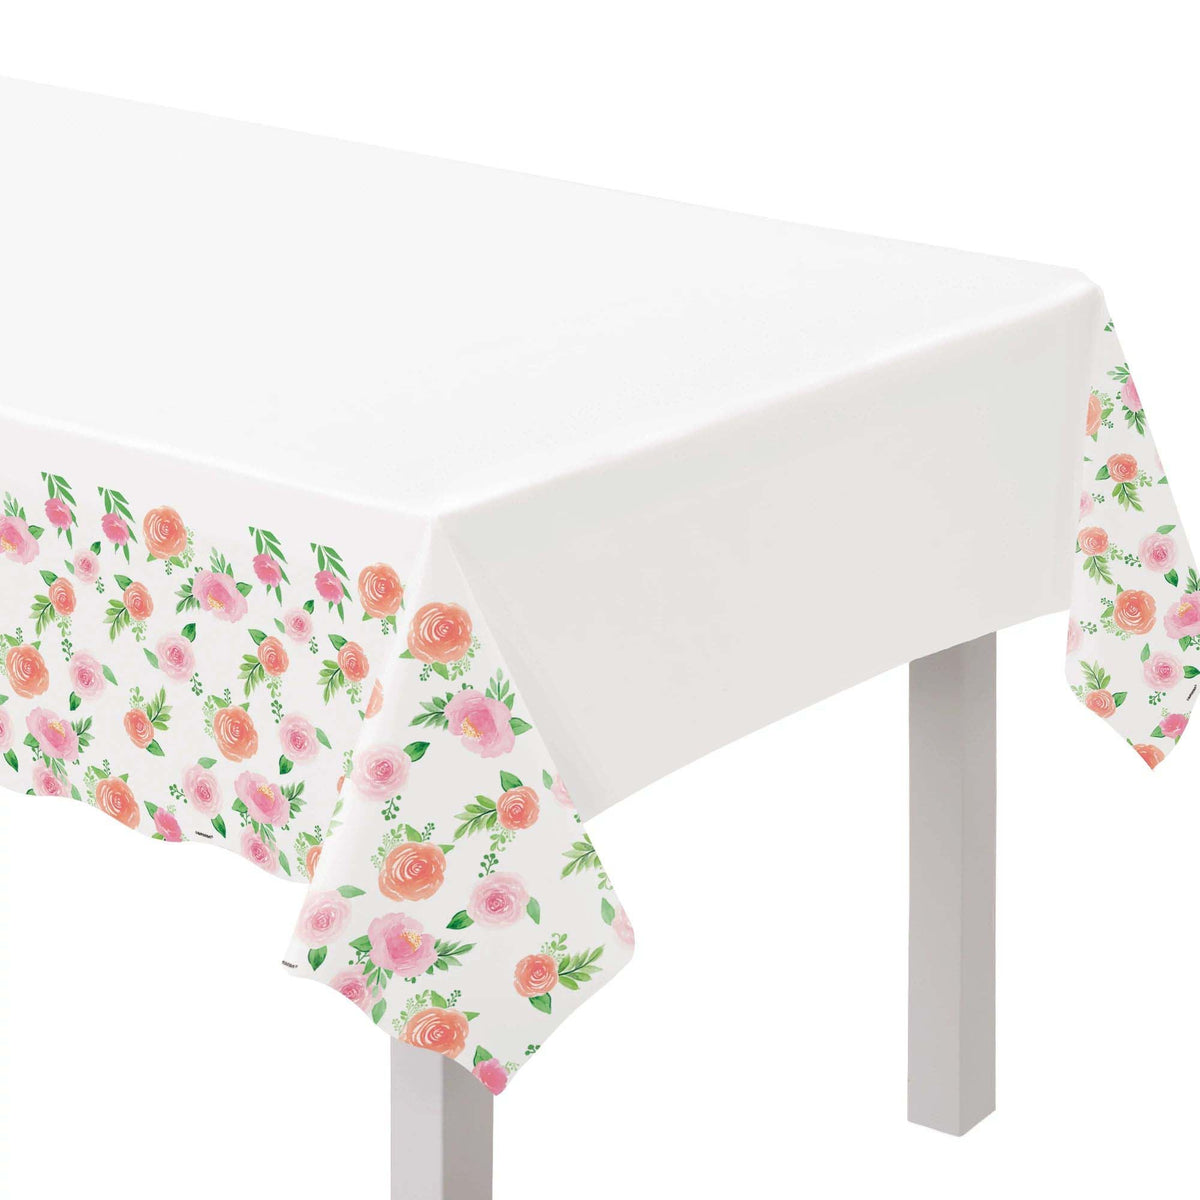 AMSCAN CA Baby Shower Floral Baby Rectangular Plastic Table Cover, 54 x 102 Inches, 1 Count